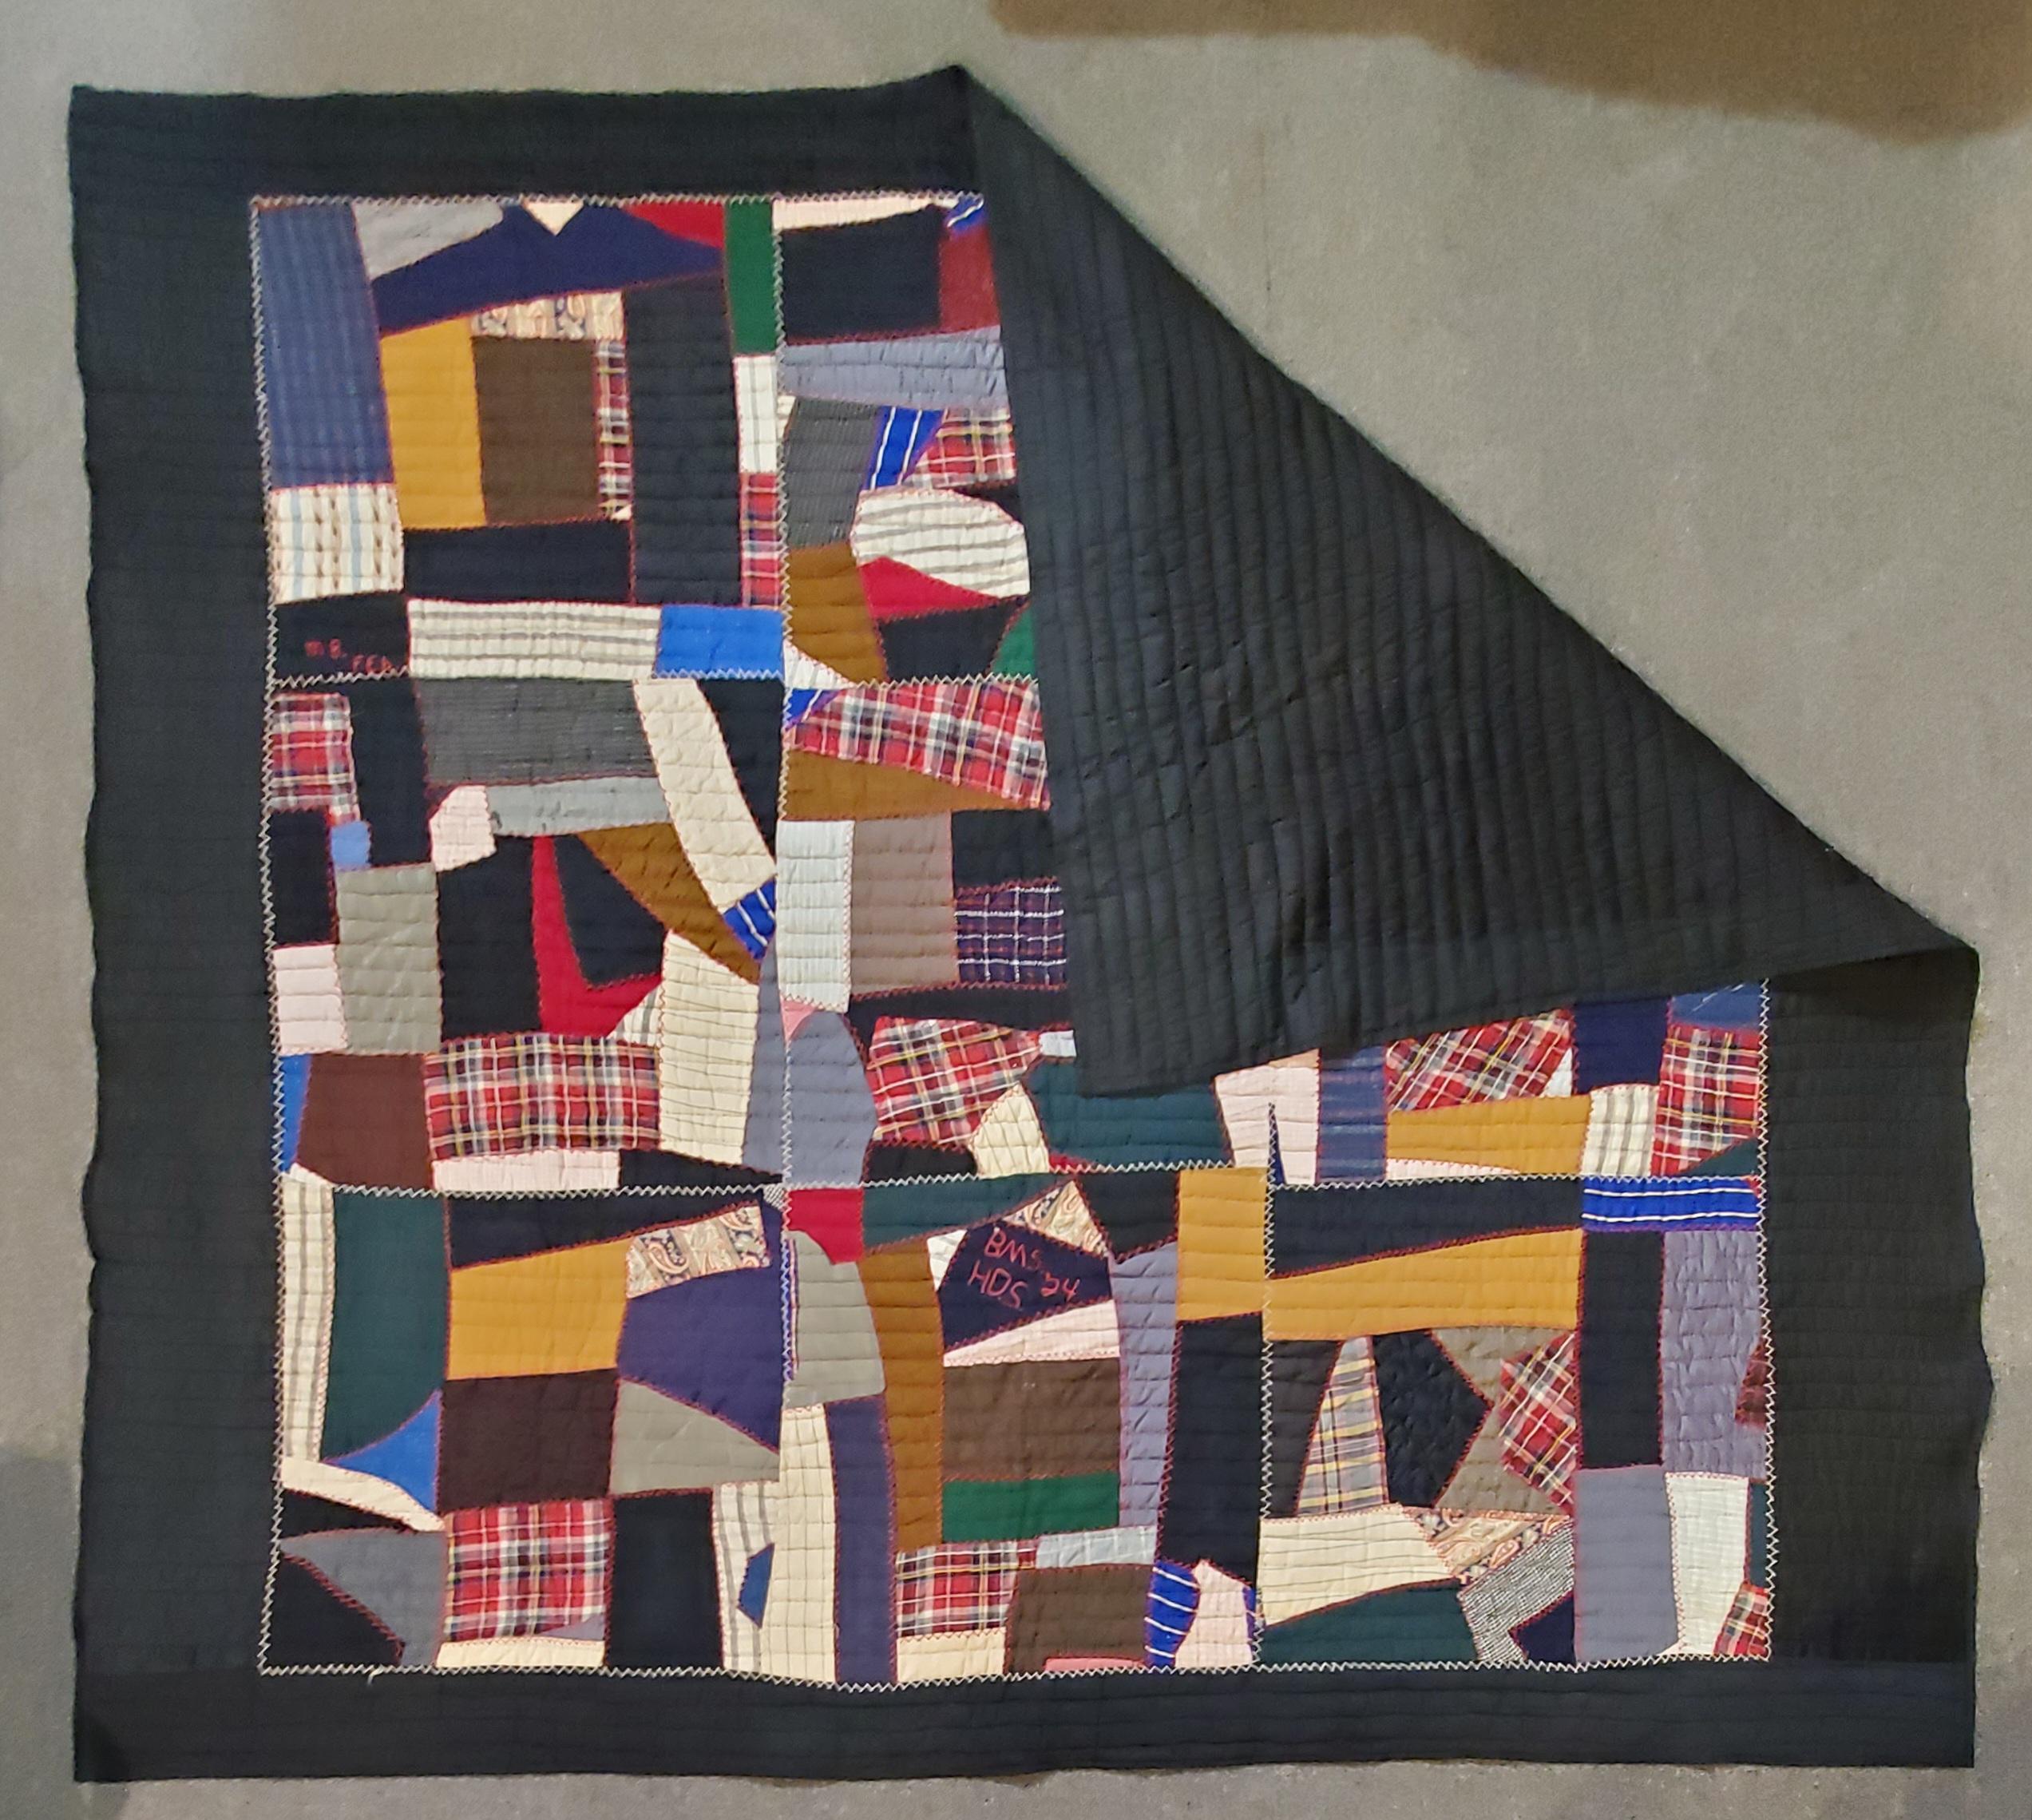 This fine crazy quilt made of velvet and wool with a sateen border and backing. Fine piecing and signed and dated 1924. The condition is very good.